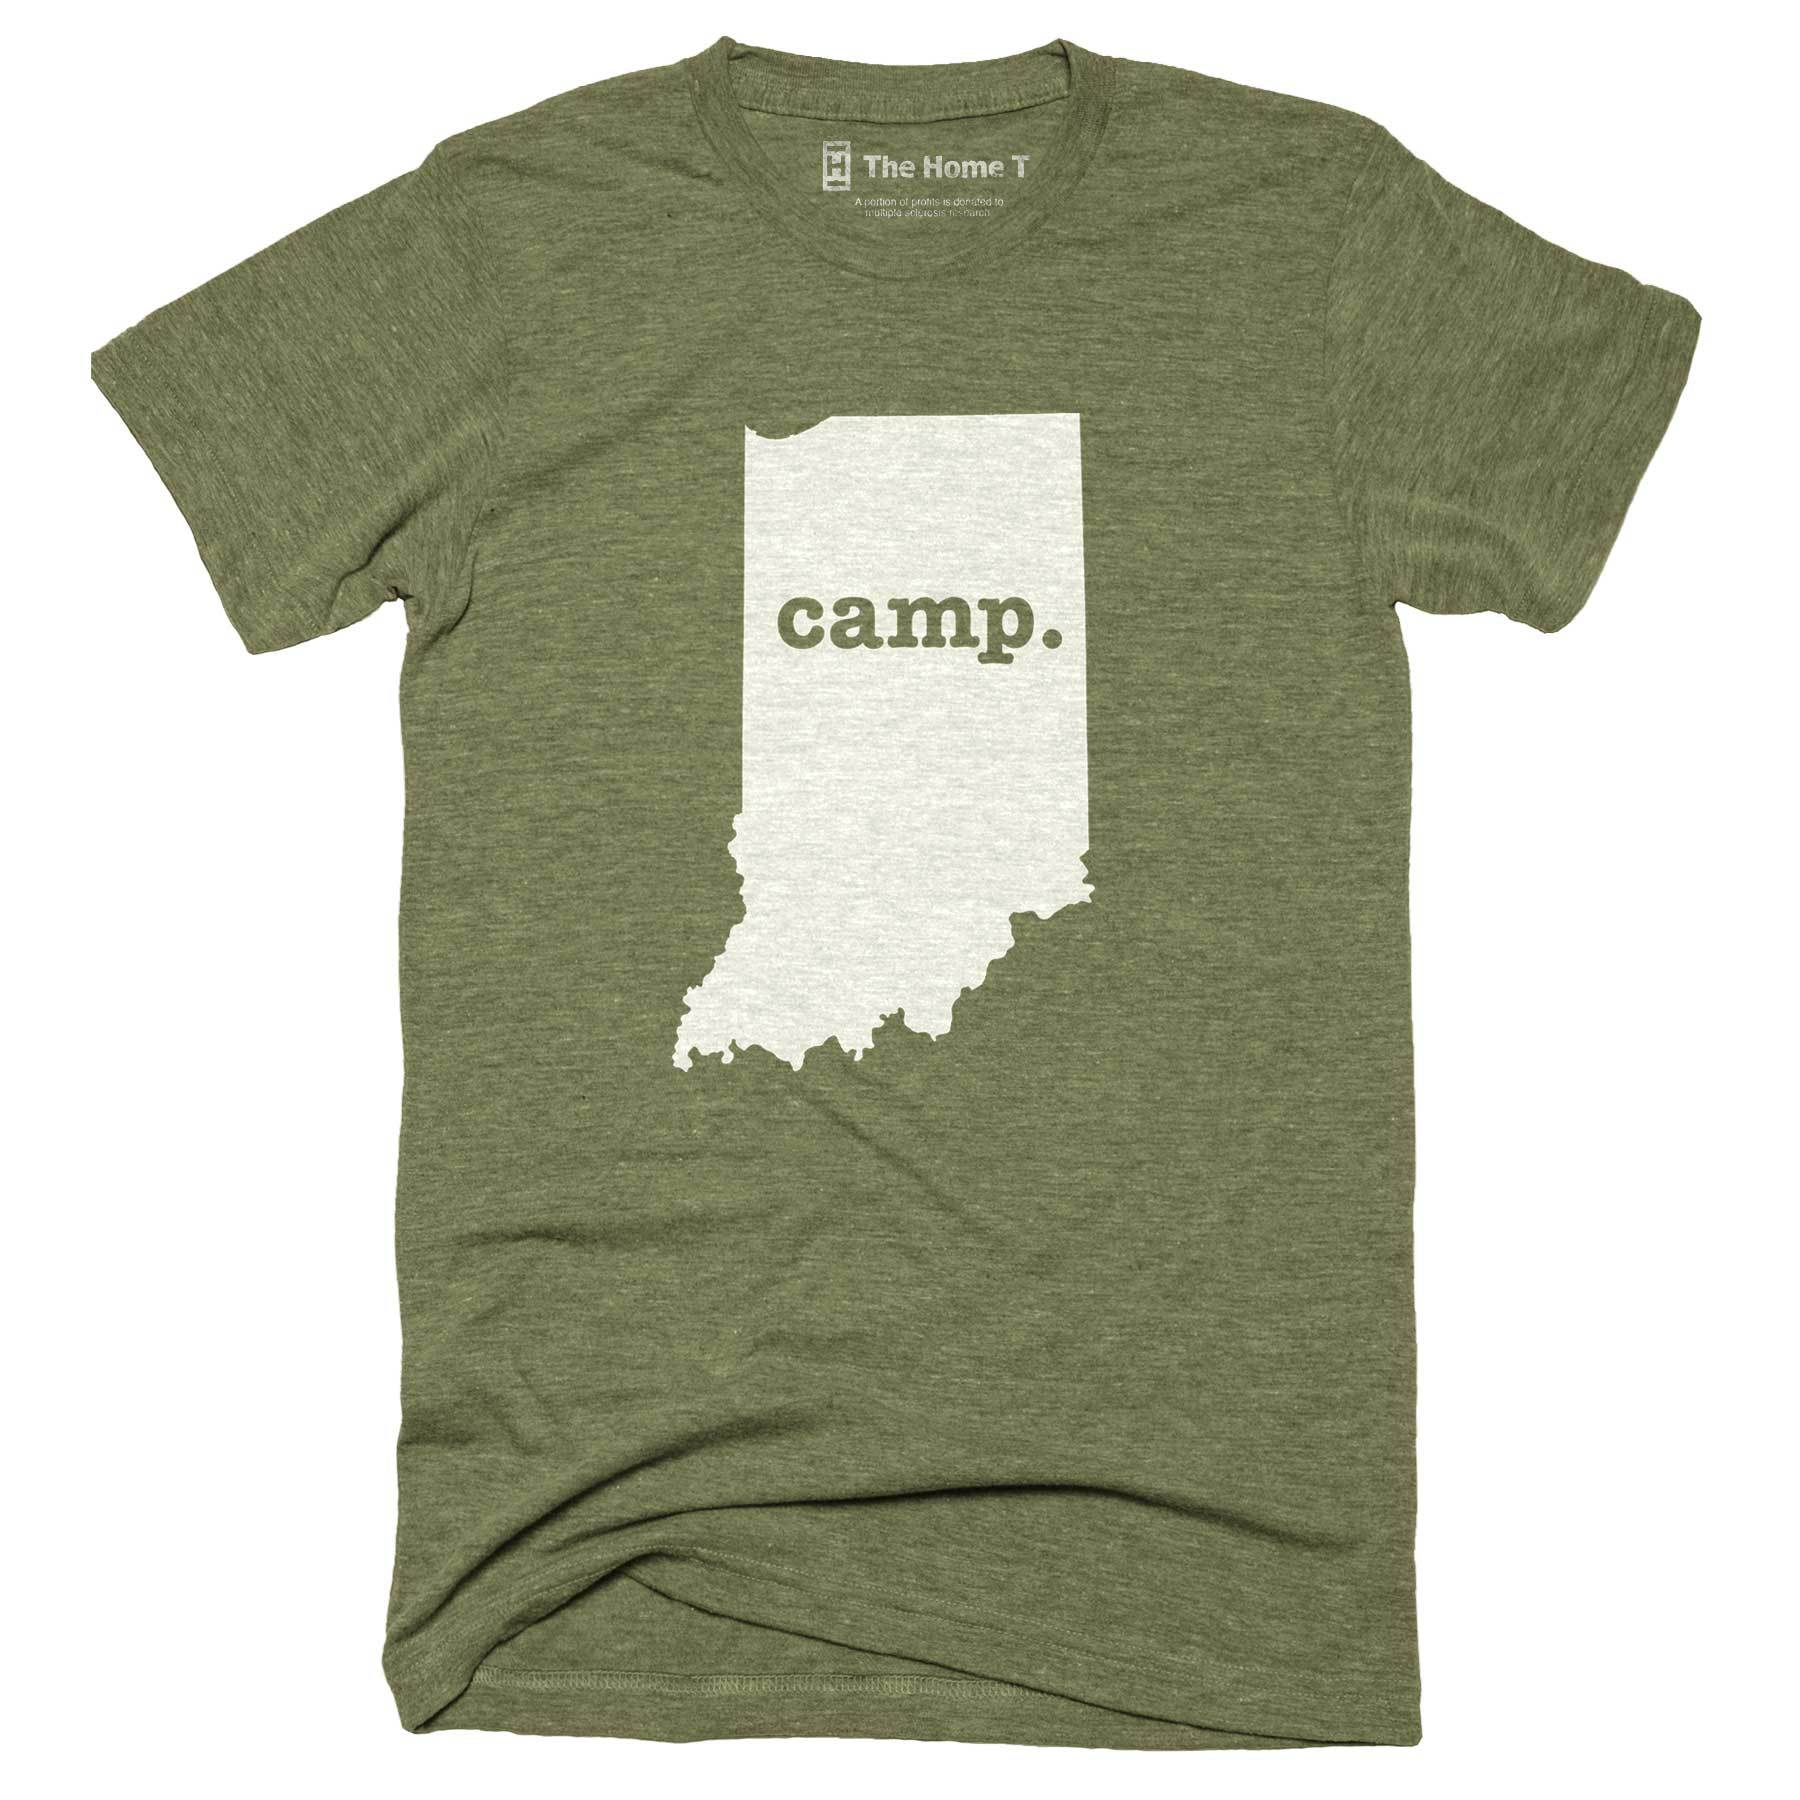 Indiana Camp Home T-Shirt Outdoor Collection The Home T XXL Army Green